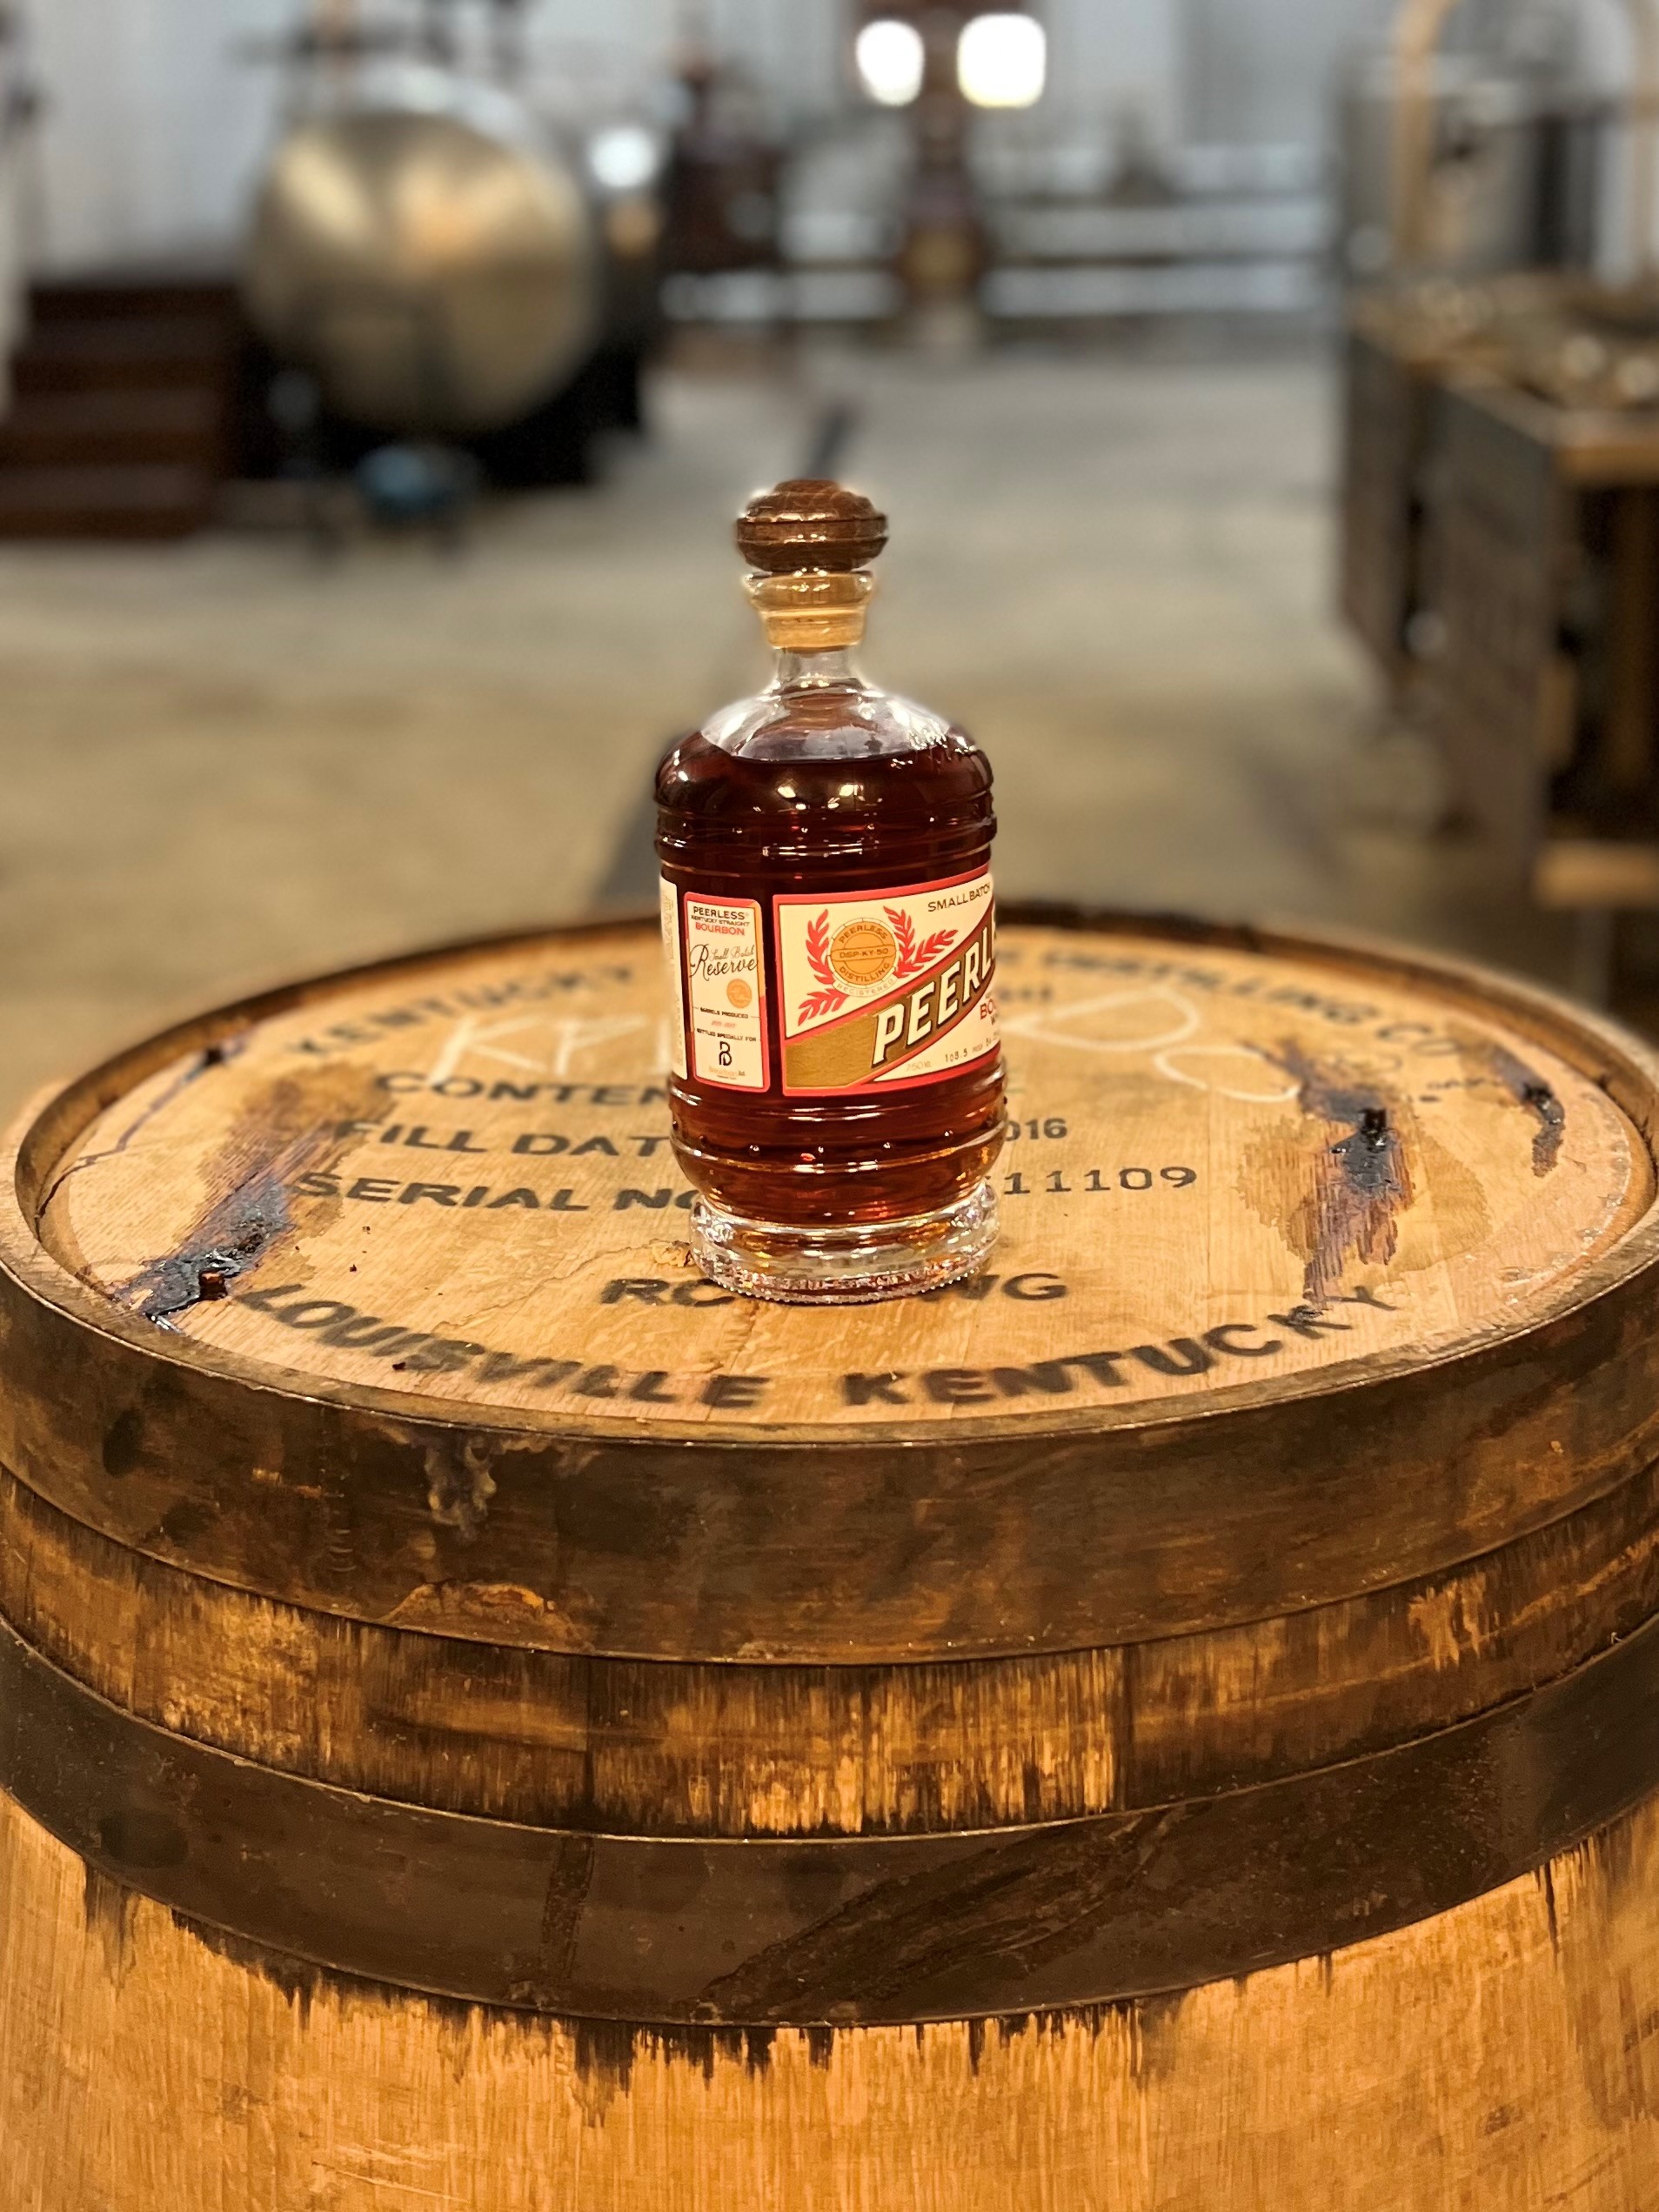 Bourbon Limited Partners with Peerless For Their First Release